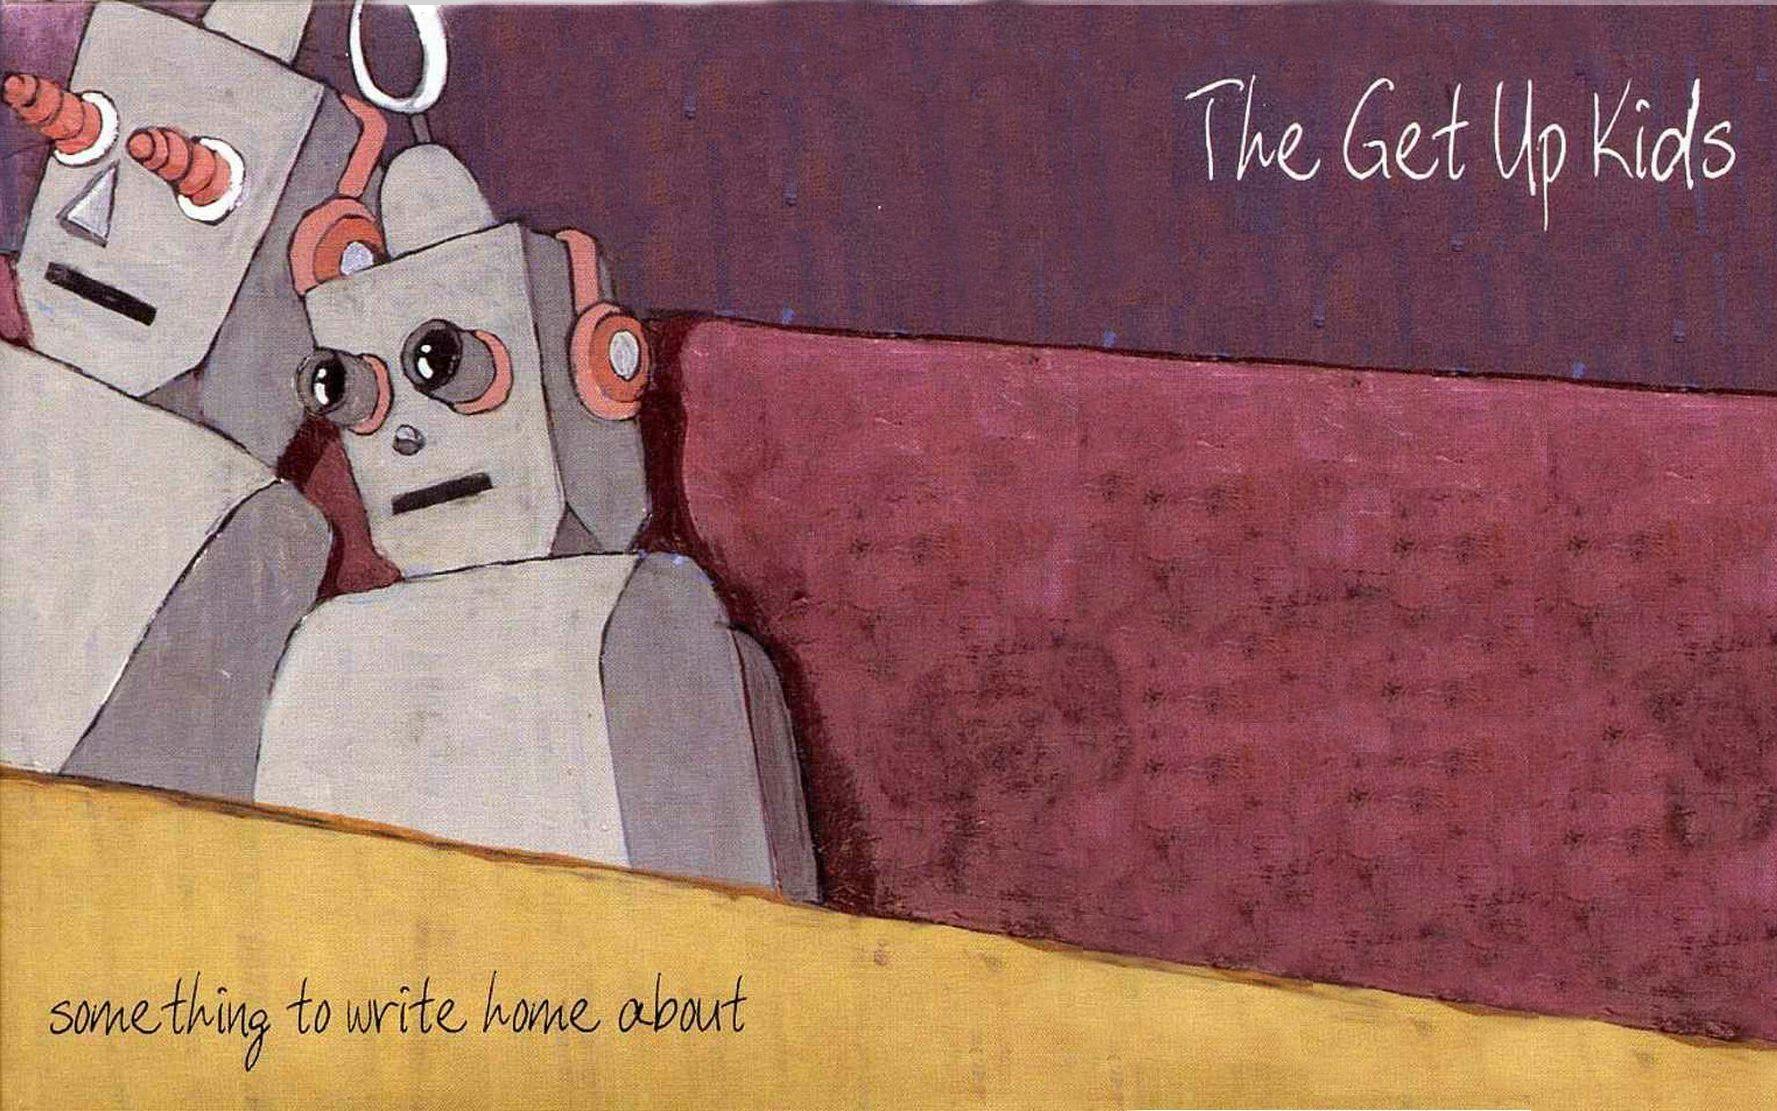 The Get Up Kids: A love letter to Something To Write Home About